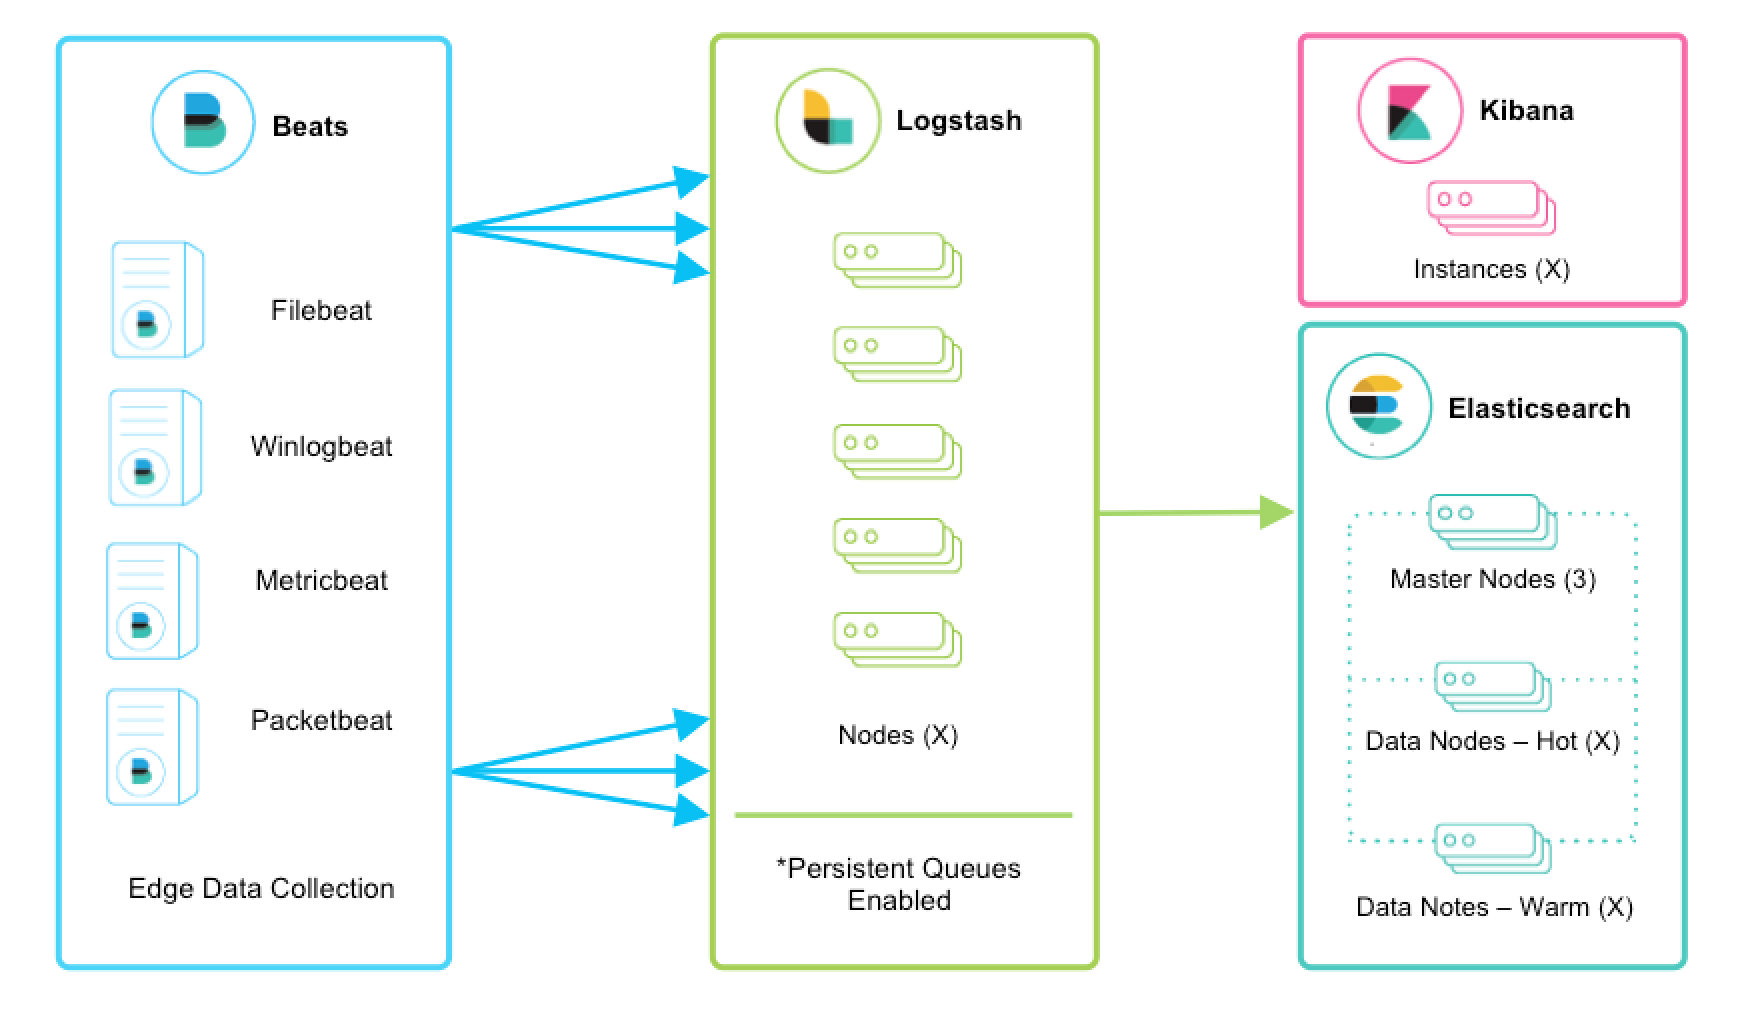 Guide on Deploying and Scaling Logstash